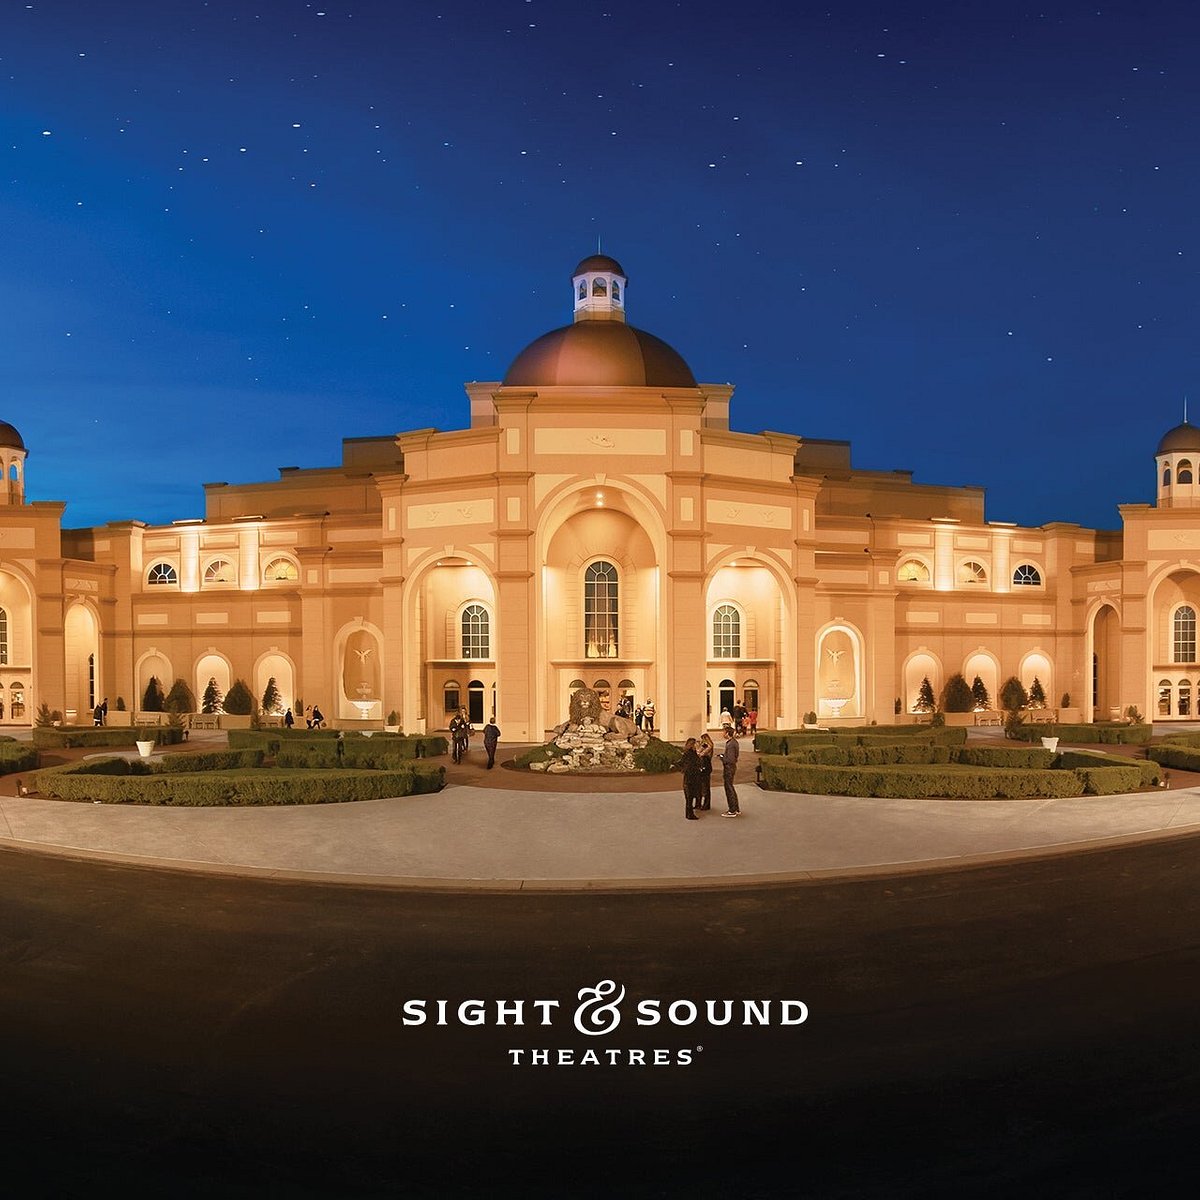 Sight And Sound Theatres Branson Ce Quil Faut Savoir